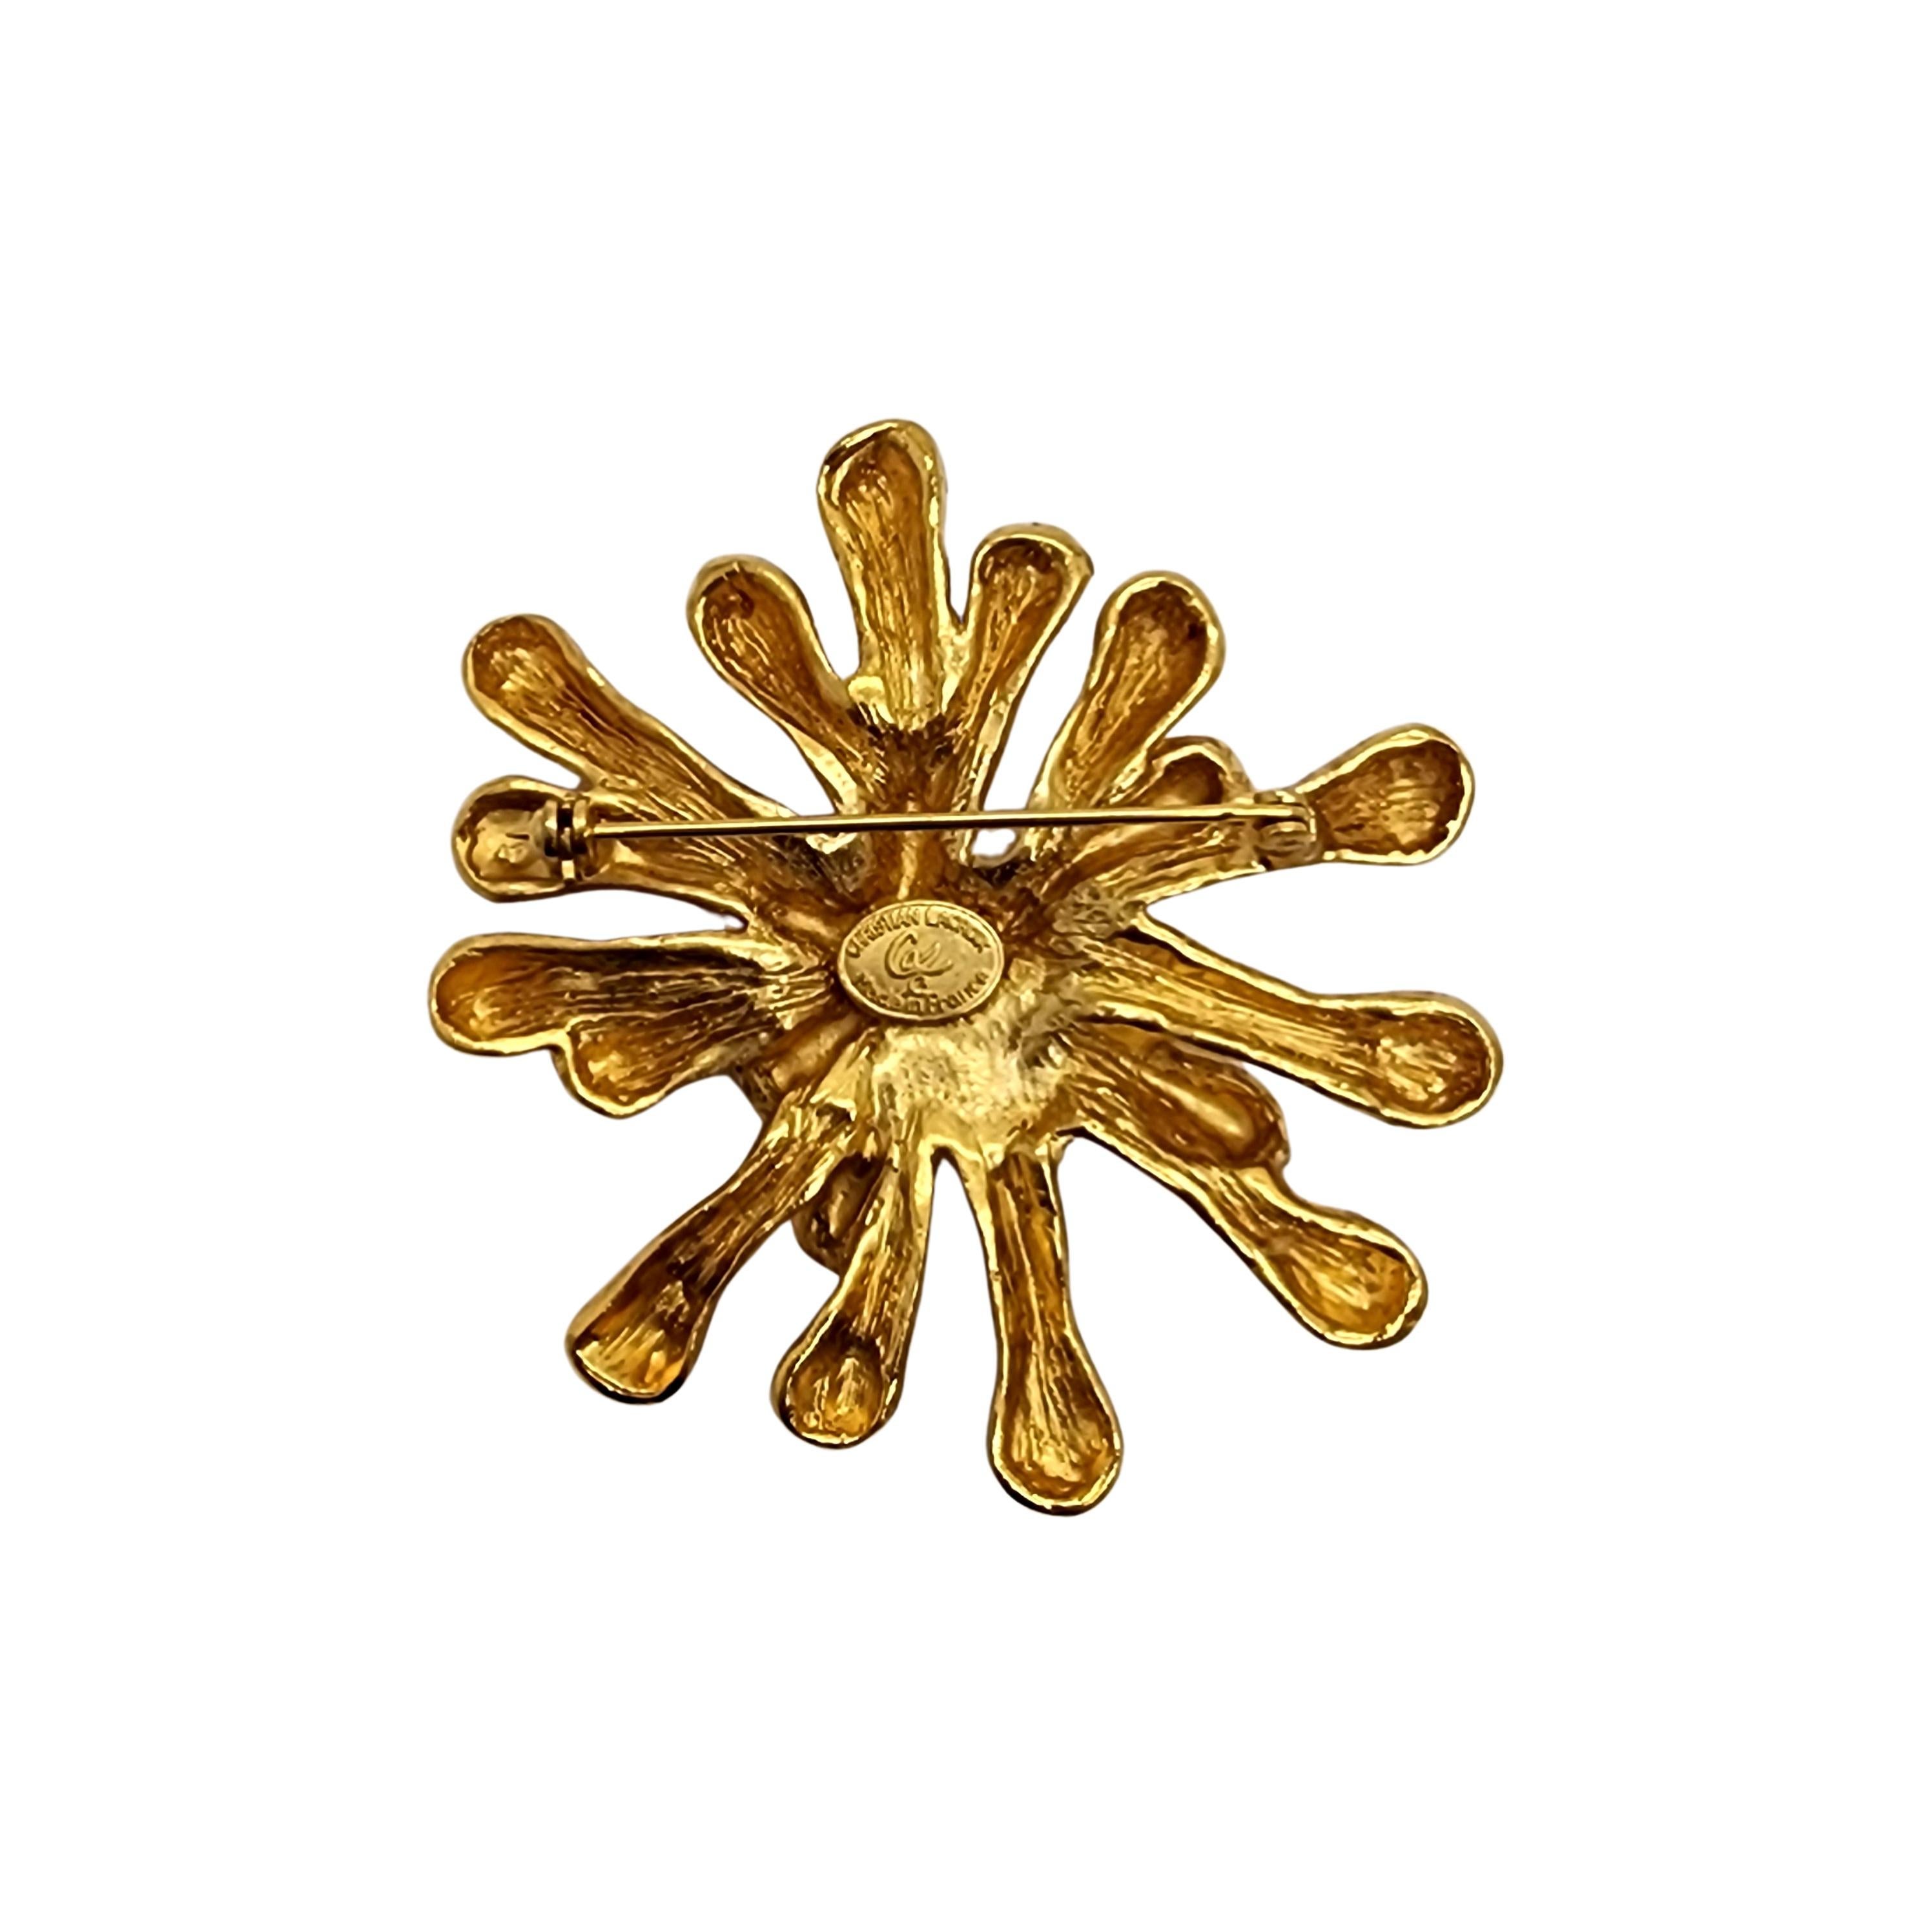 Vintage gold tone splash splatter pin/brooch by Christian LaCroix, France.

Beautiful piece by iconic French designer, Christian LaCroix, known for his extravagant designs. Features a splash splatter or amoeba design.

Measures approx 2 5/8